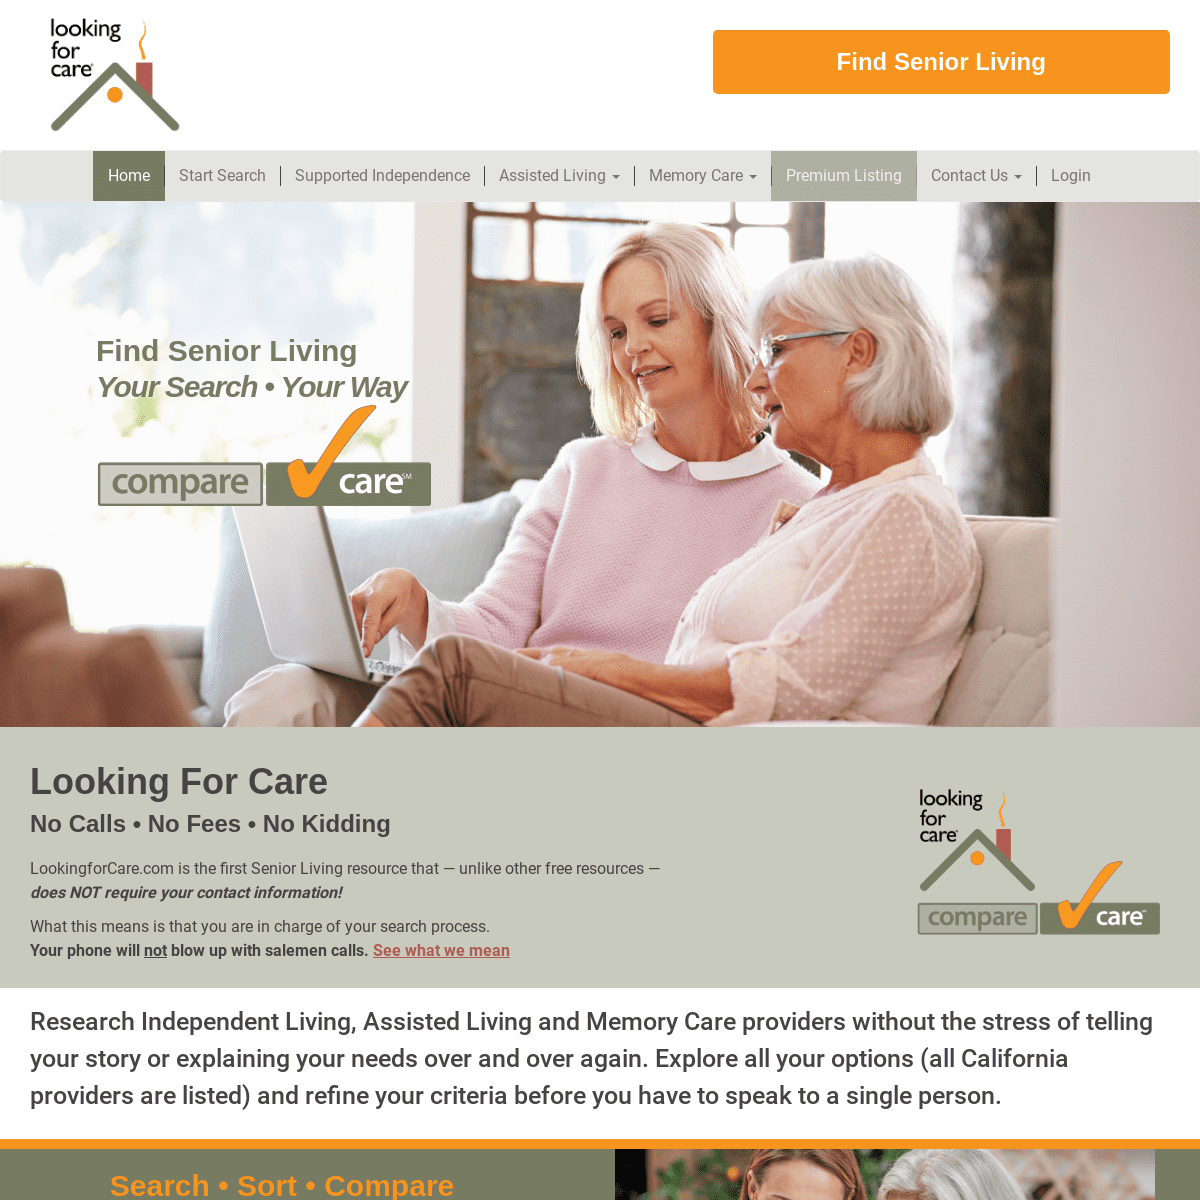 A complete backup of lookingforcare.com